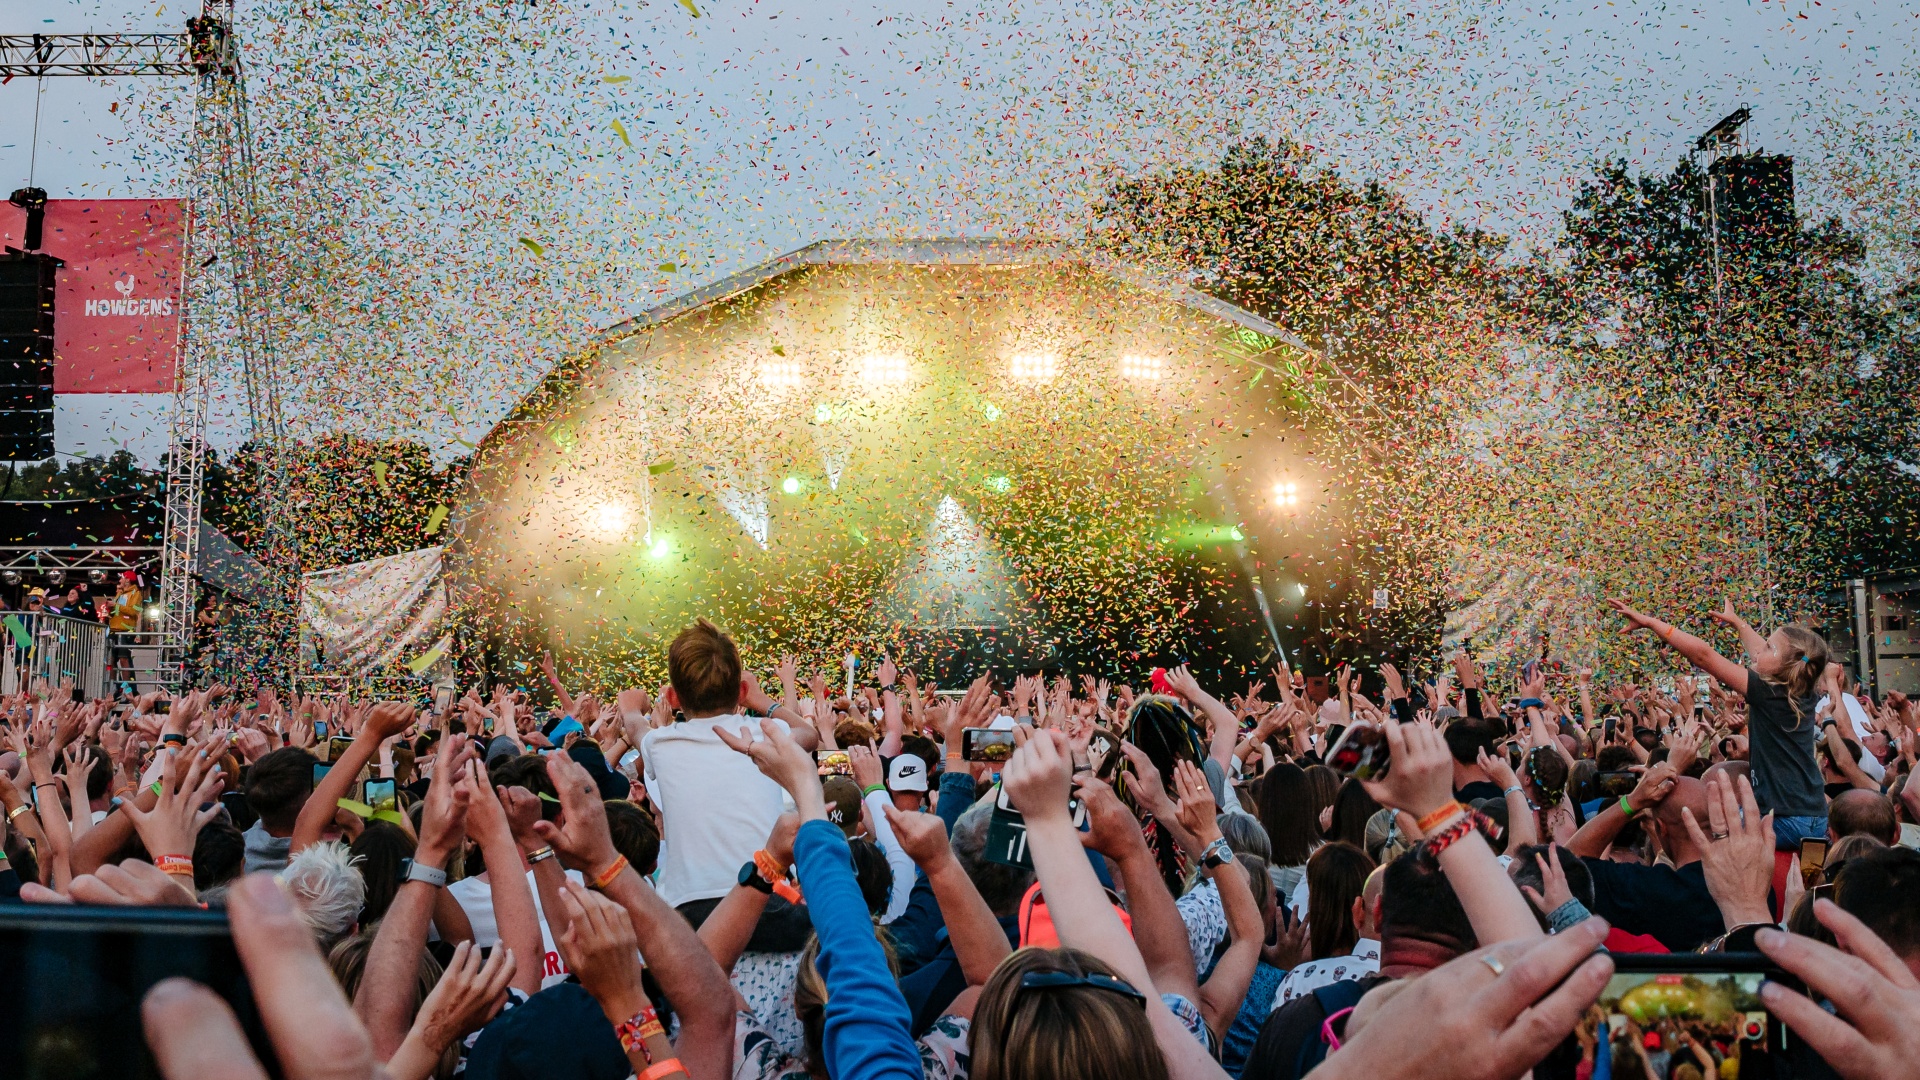 Hands of big crowd in front of stage with colourful confetti falling.jpg